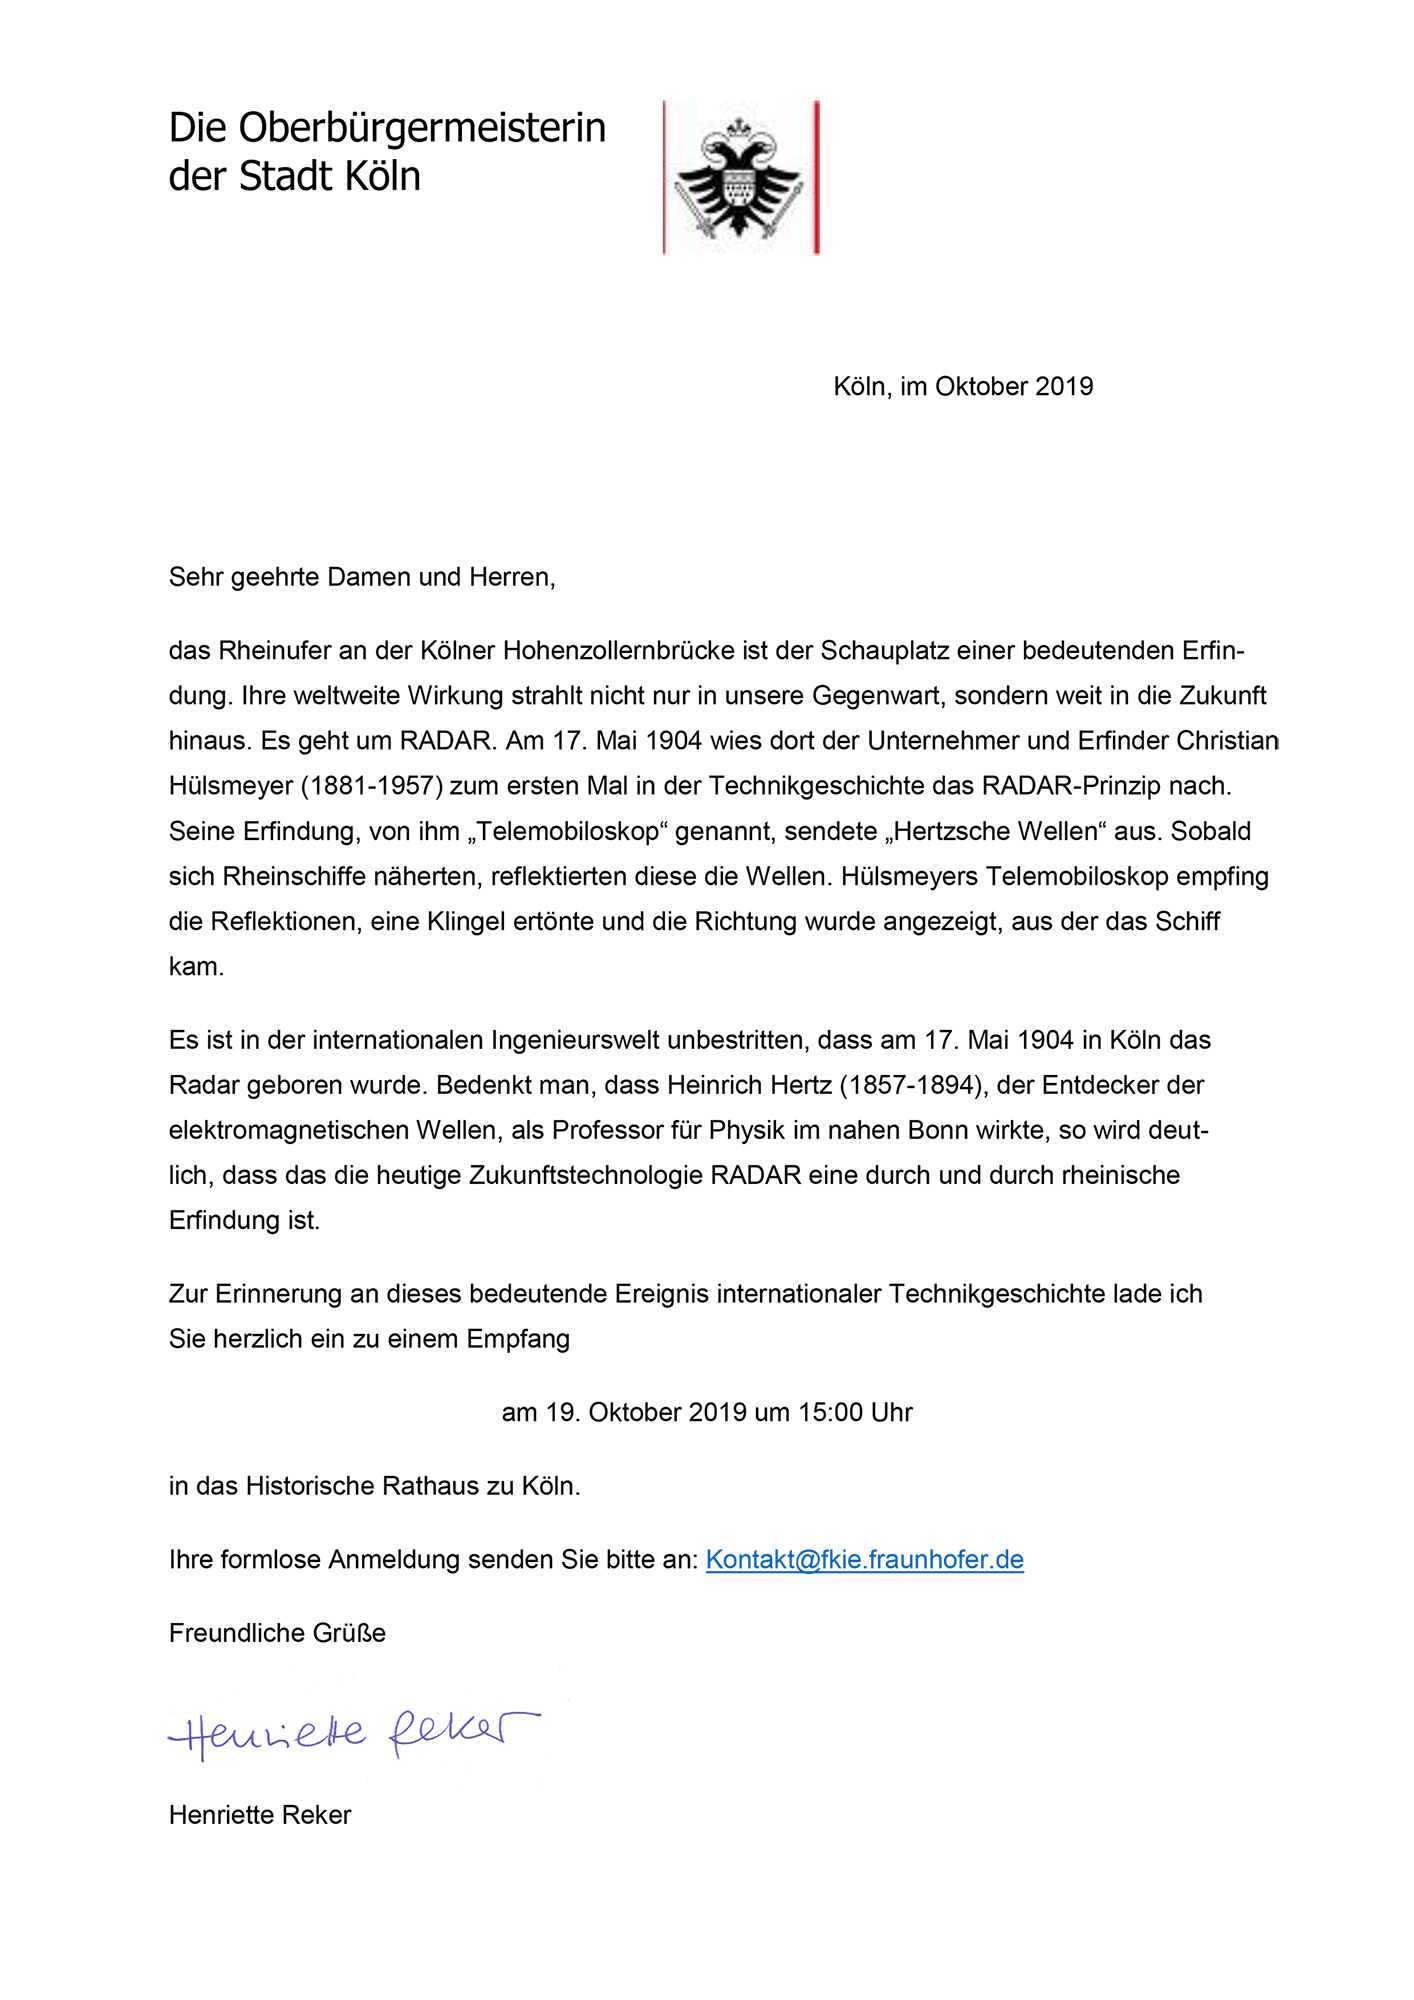 Official invitation of the Lord Mayor of the City of Cologne